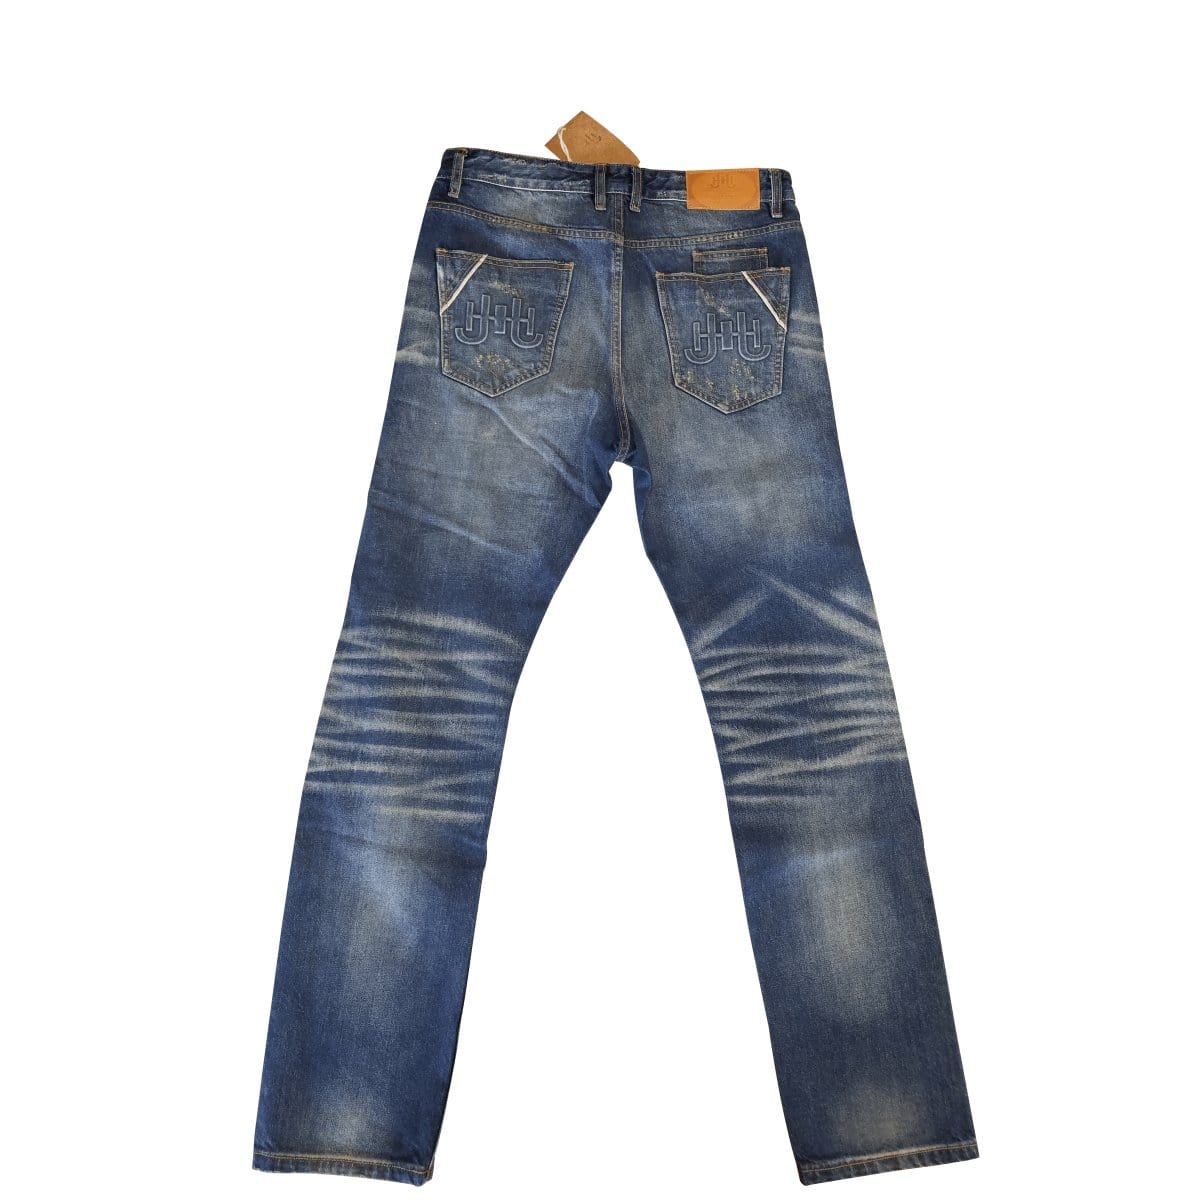 J.Hinton Collections Rugged Urban - Embossed Denim Jeans